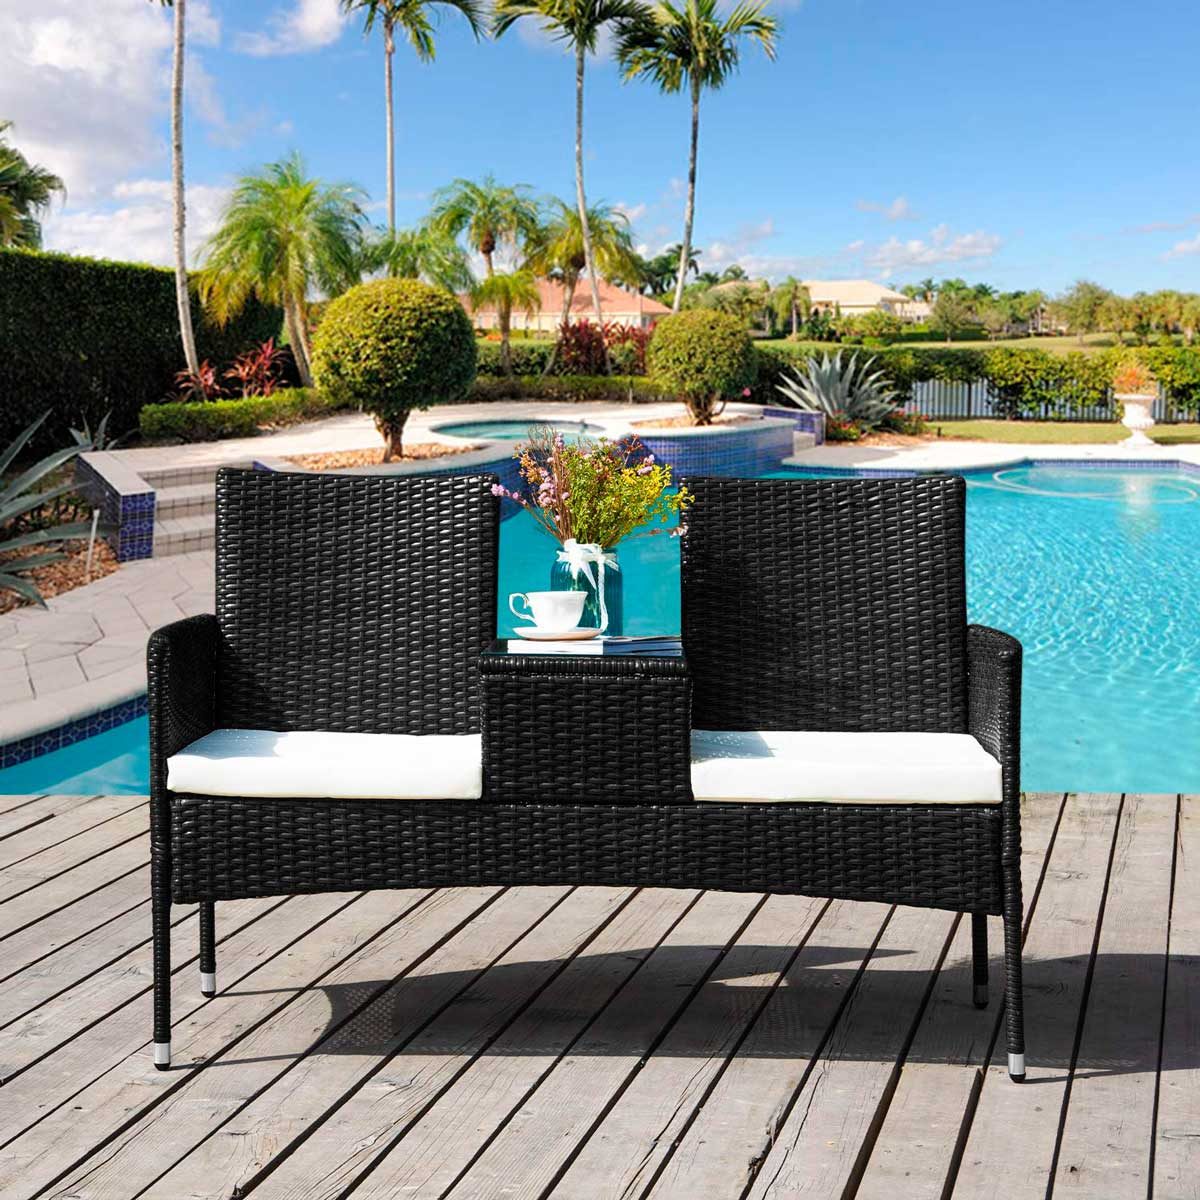 Wholesale Patio Furniture: Choosing Durable And Stylish Pieces For Your Next Gathering